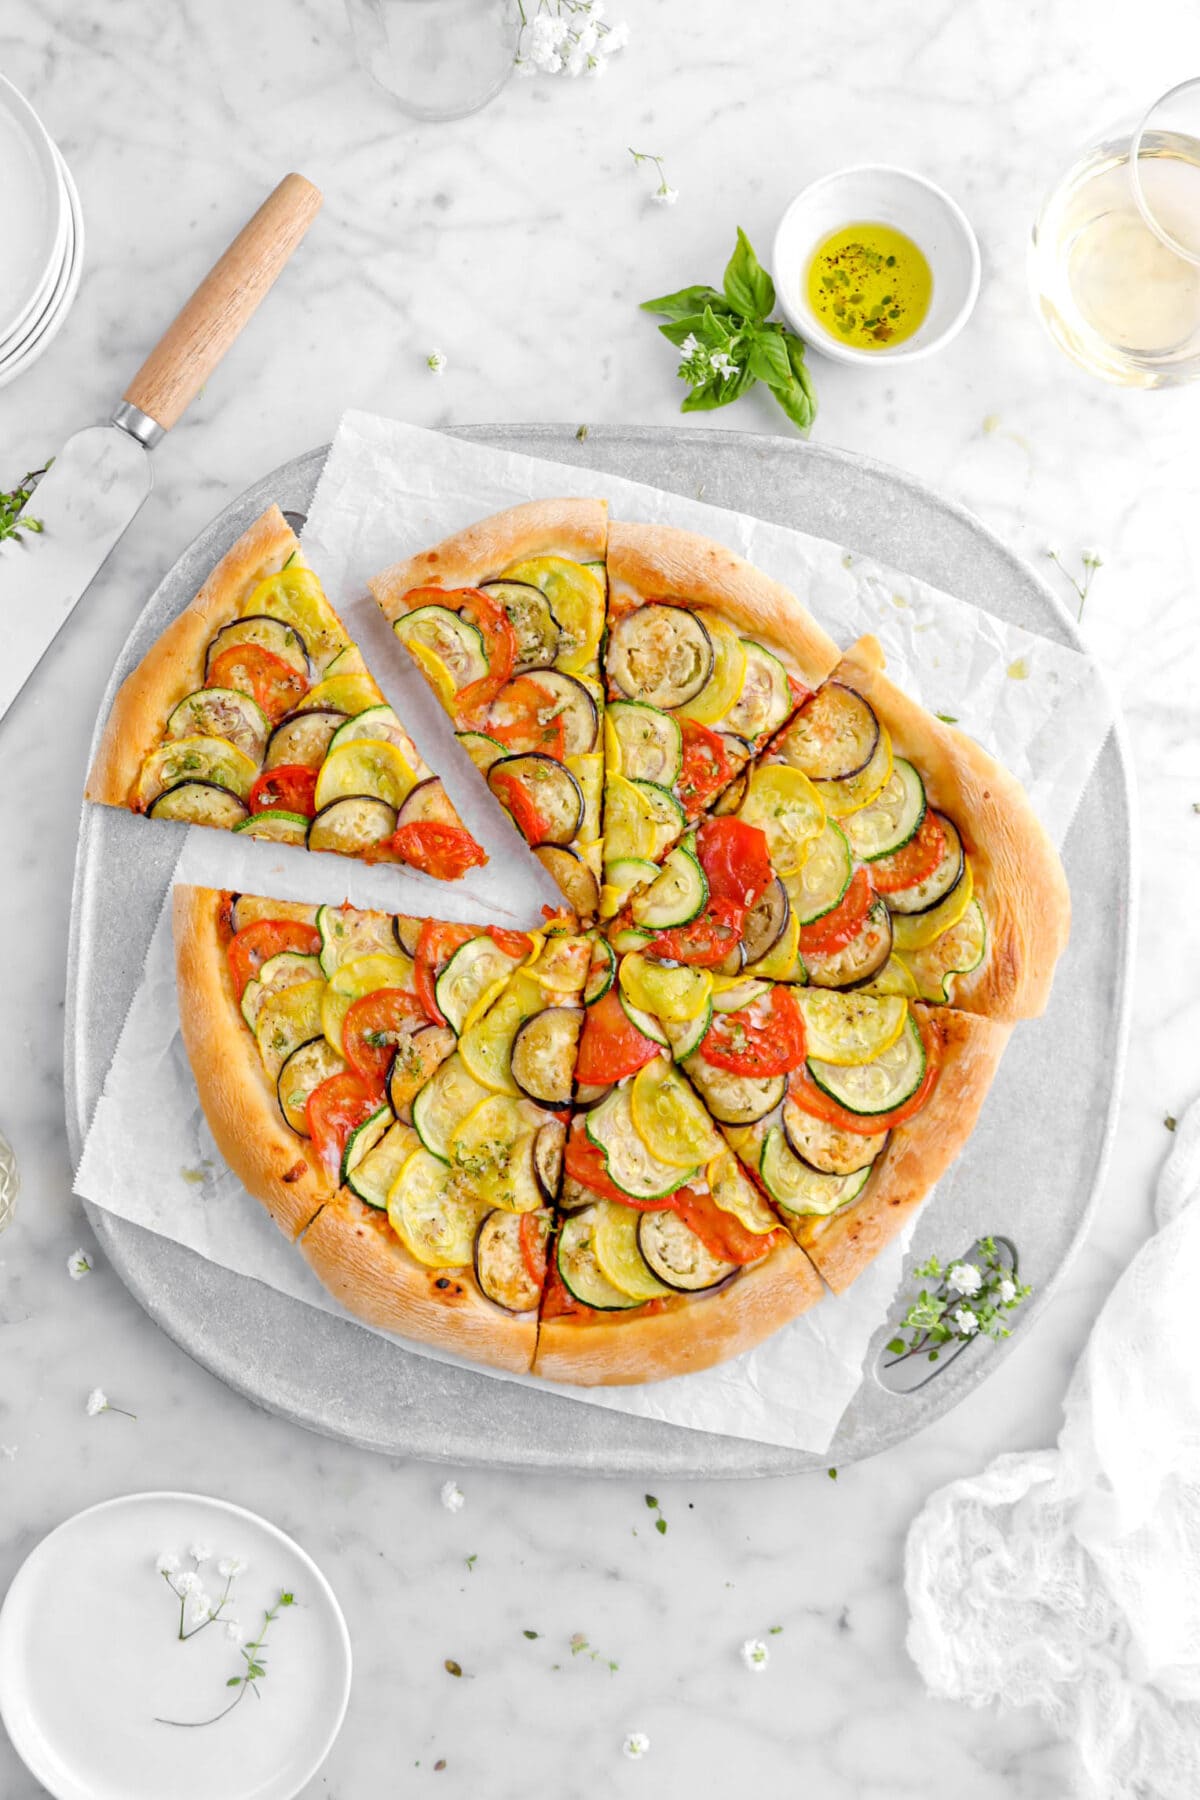 pizza on metal grill pan with top left corner piece pull away from pizza with fresh herbs, bowl of oil, and glass of wine beside